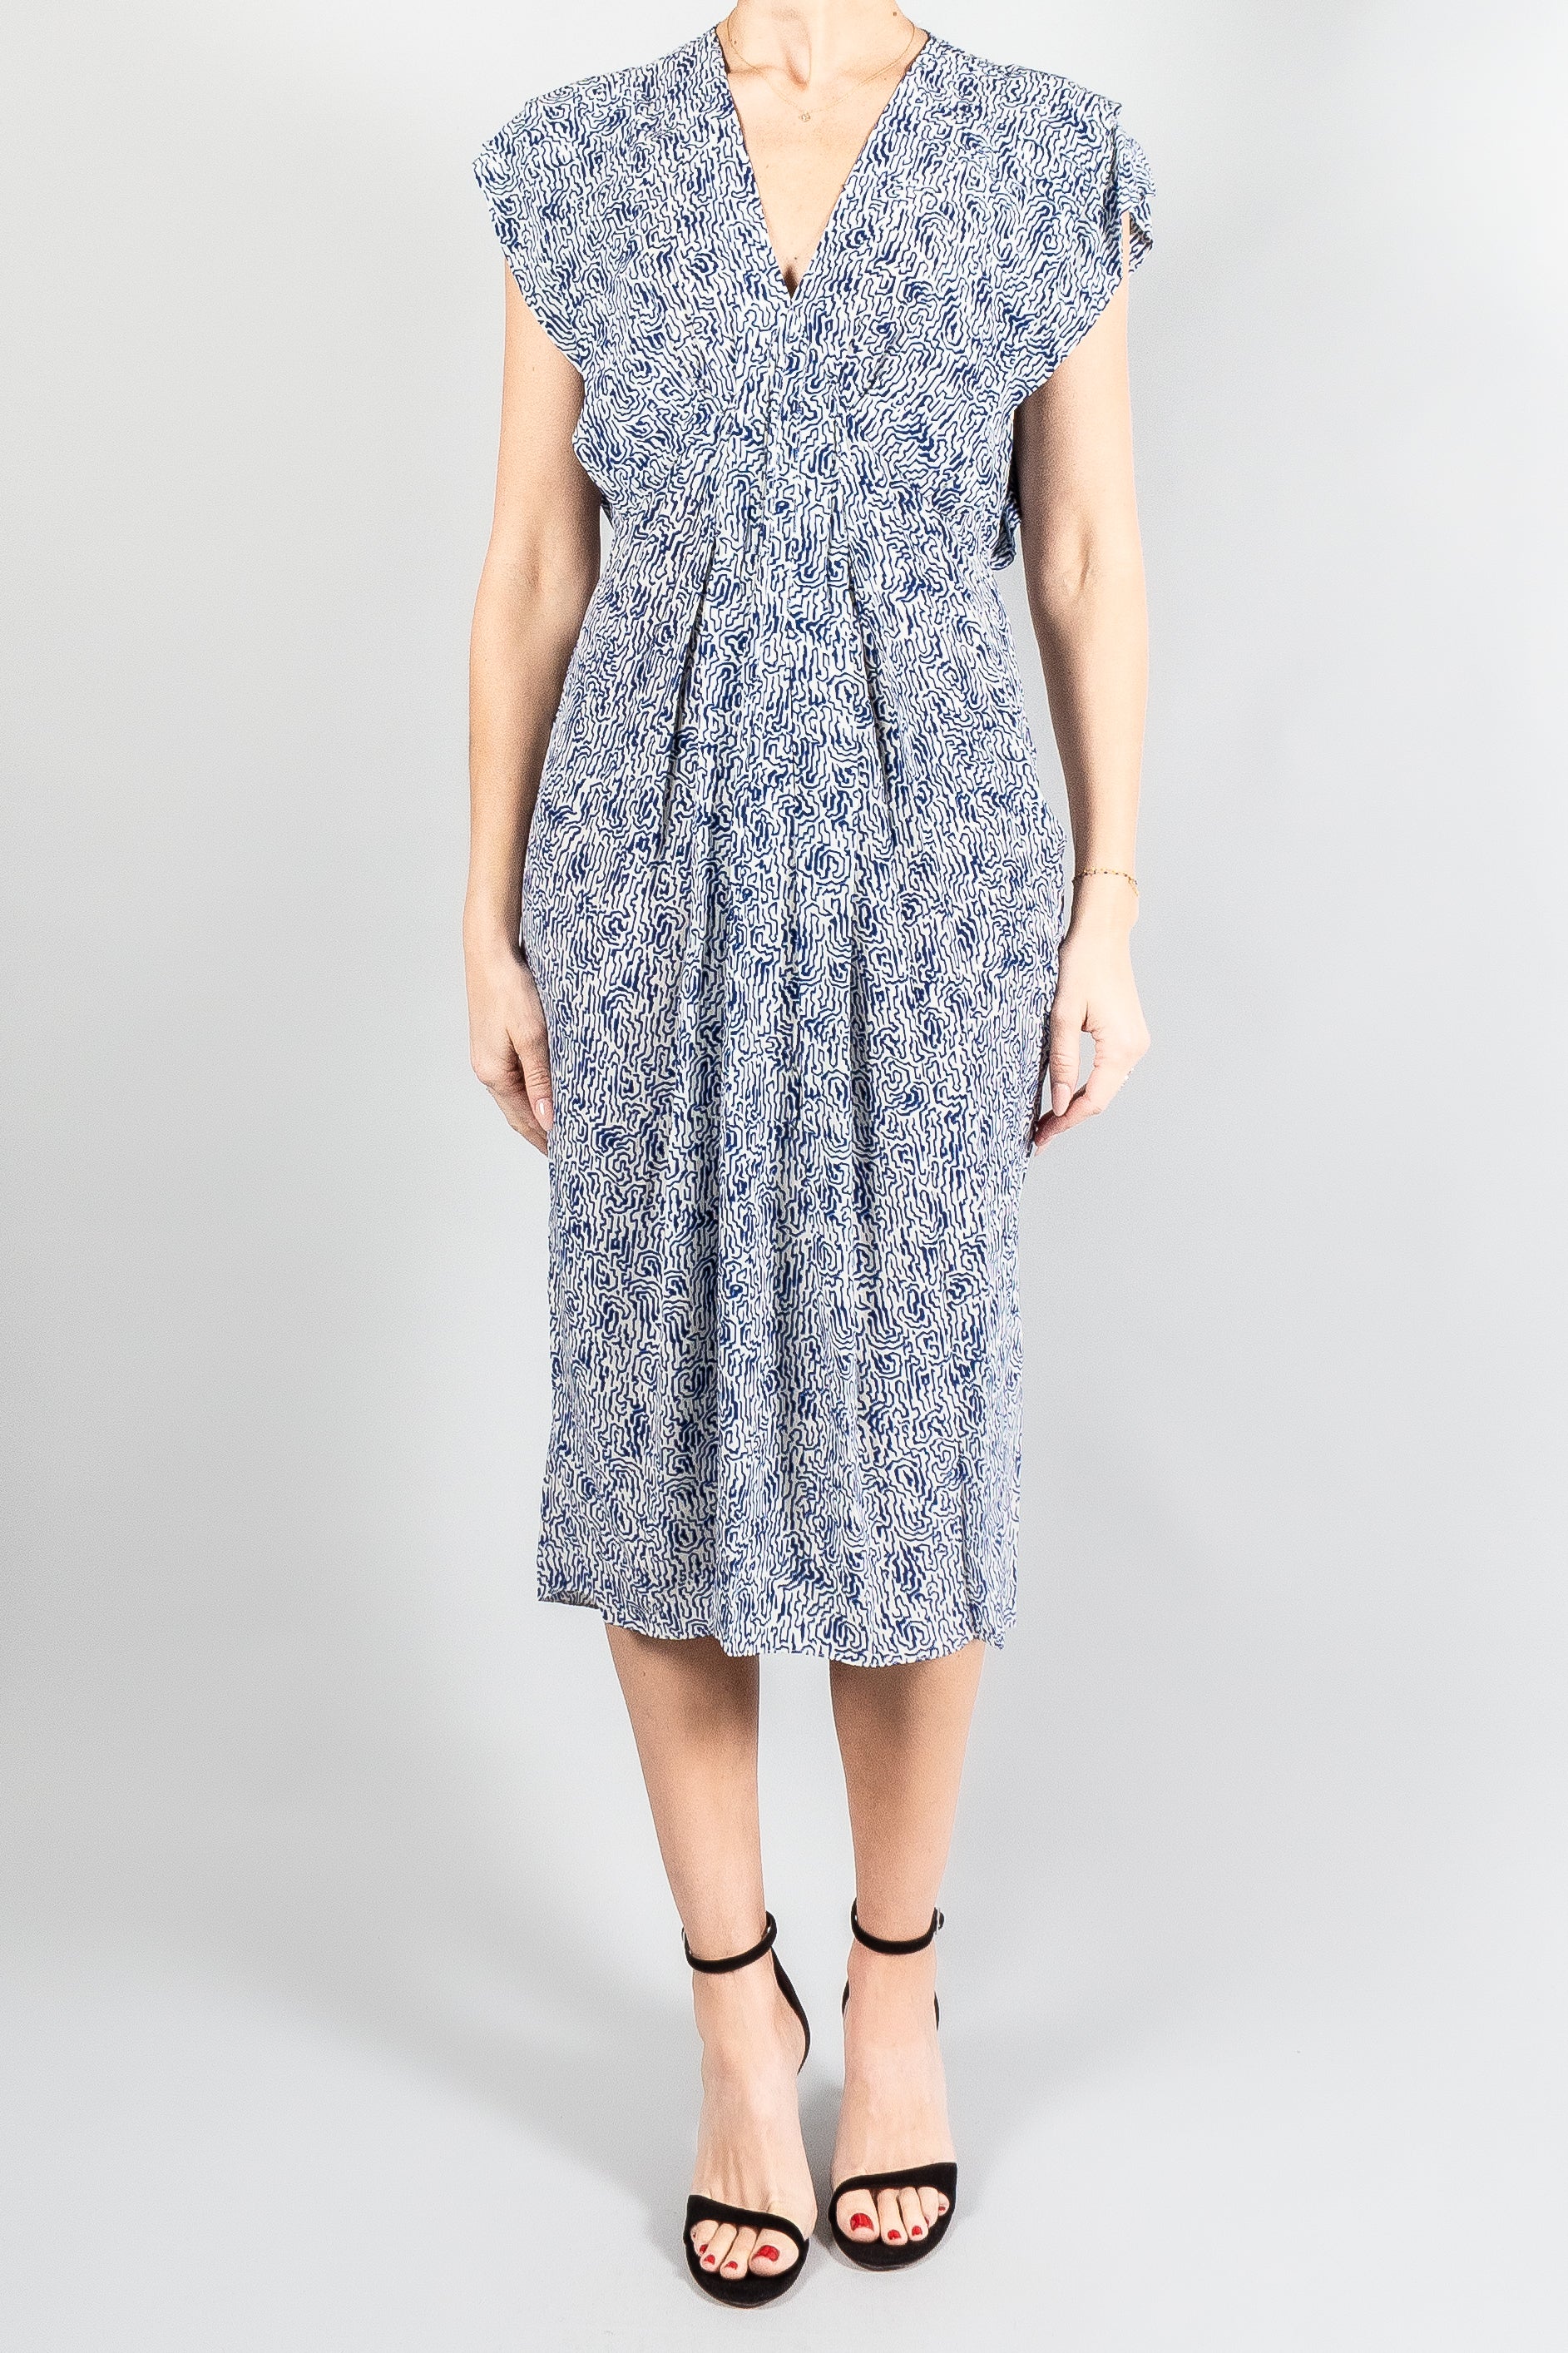 Isabel Marant Etoile Epolia Dress-Dresses and Jumpsuits-Misch-Boutique-Vancouver-Canada-misch.ca